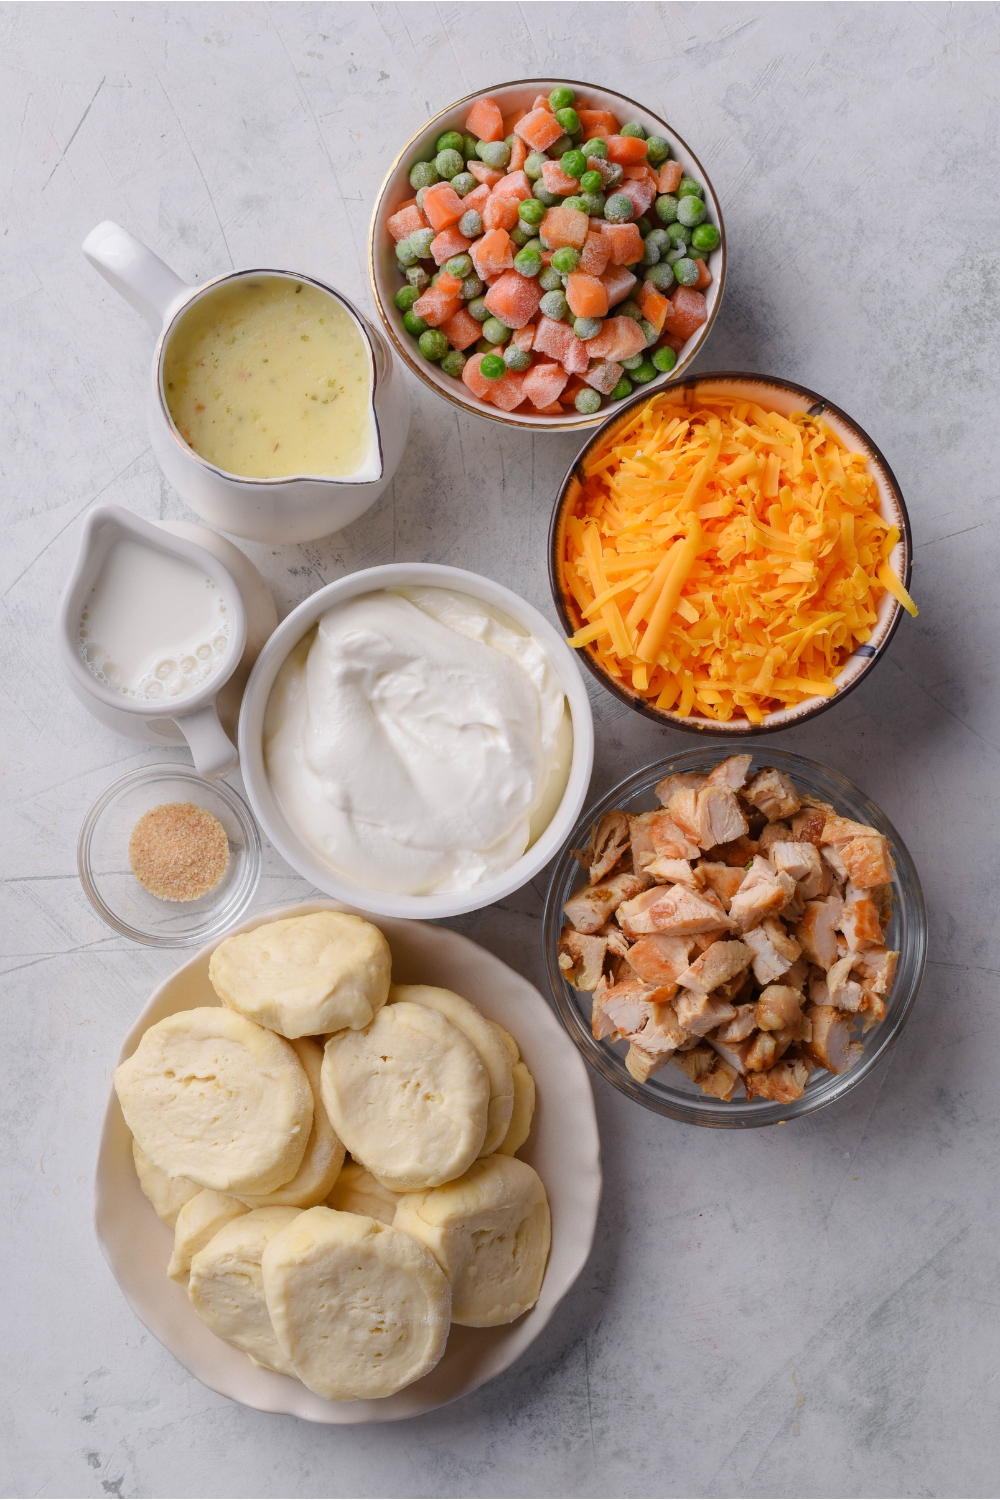 An assortment of ingredients including bowls of peas and carrots, shredded cheese, sour cream, diced chicken, biscuit dough slices, garlic powder, and pitchers of milk and cream of chicken soup.